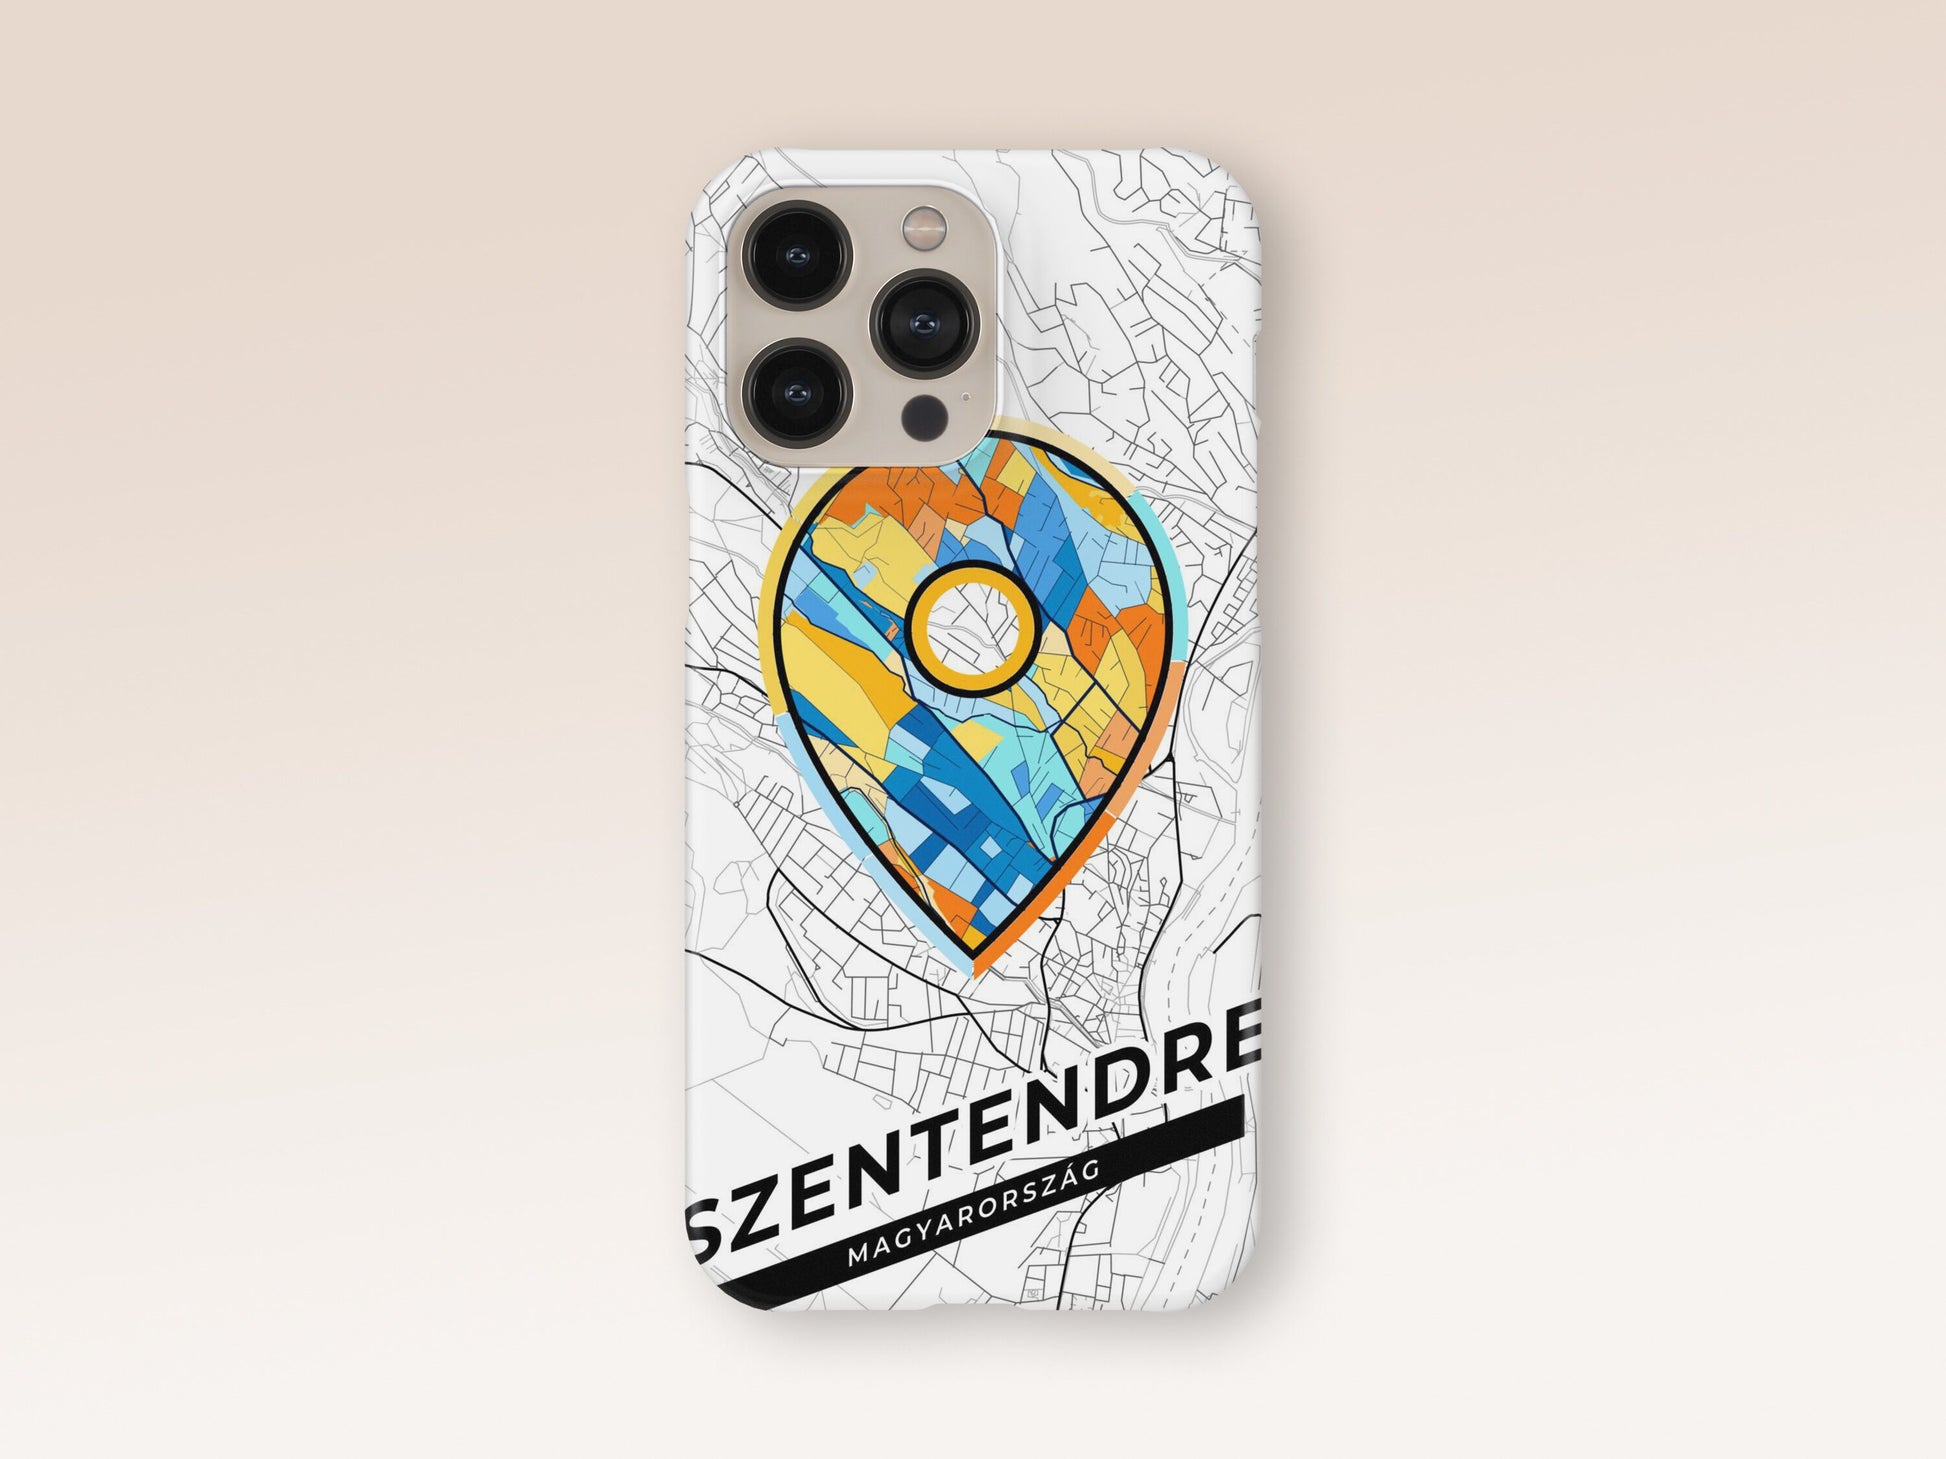 Szentendre Hungary slim phone case with colorful icon 1